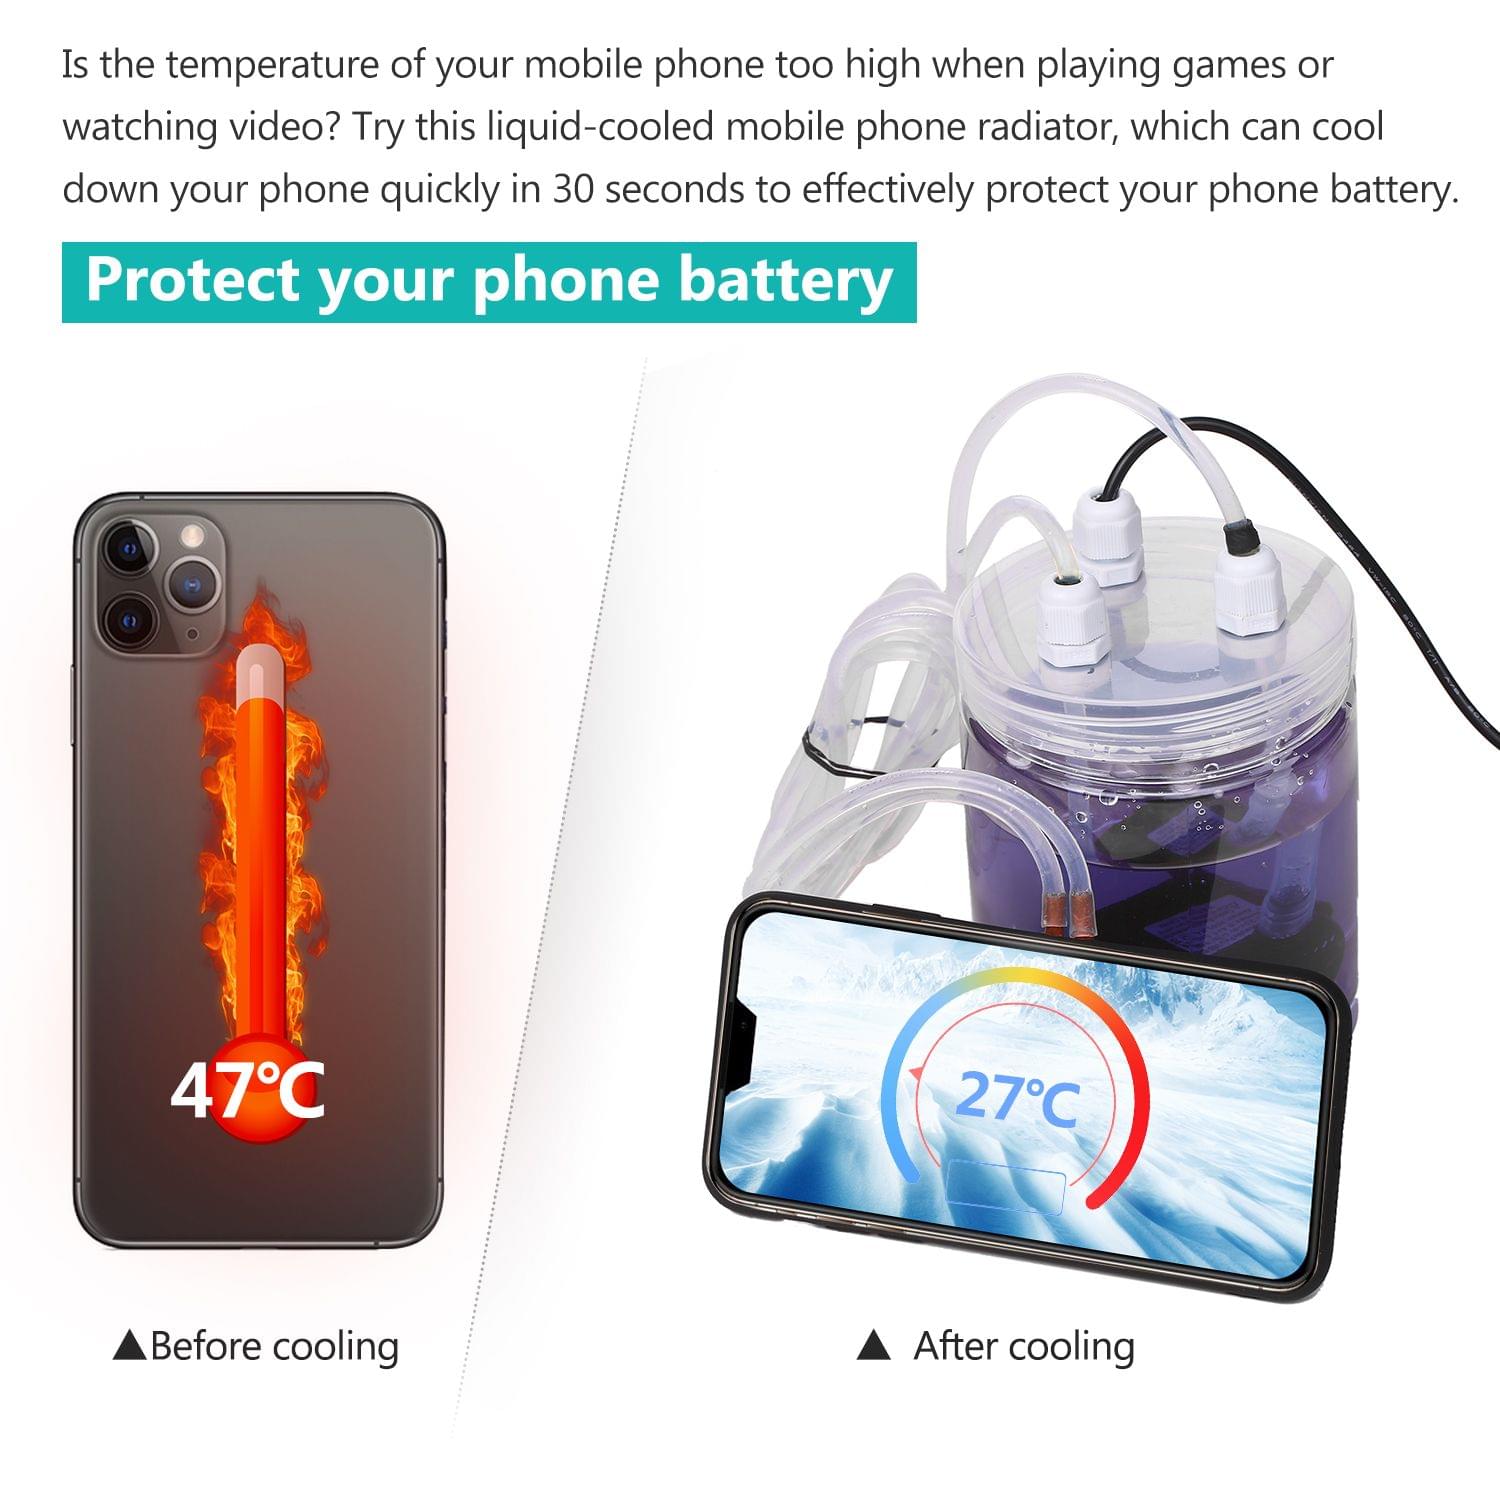 Phone Cooler Mobile Phone Radiator Water-cooled Cooling - Compatible with iPhone 11 5.8inch